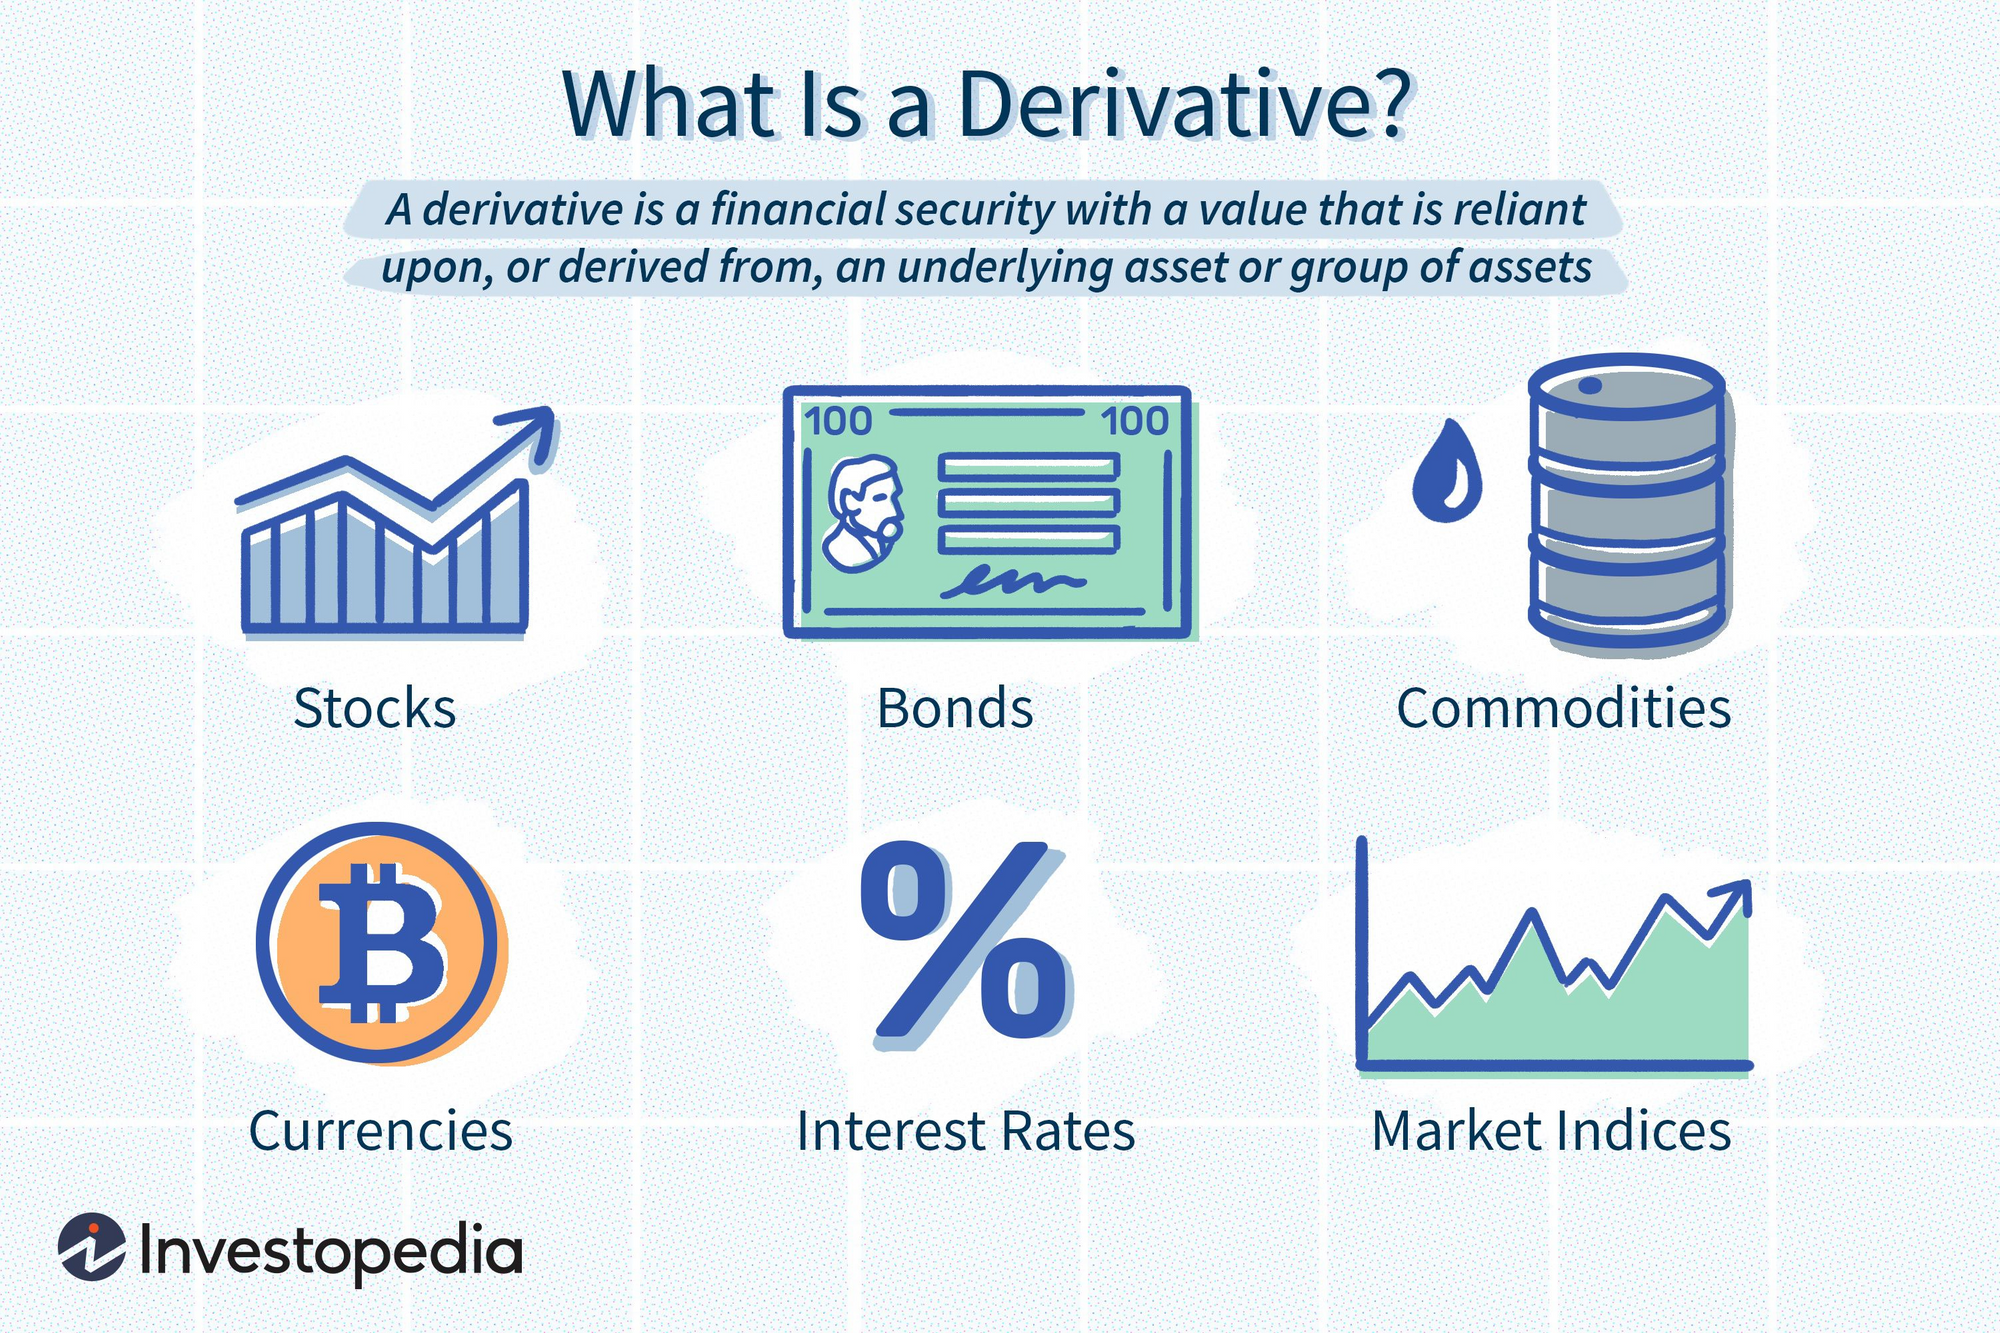 screenshot of Investopedia’s infographic that says “What is a derivative?”